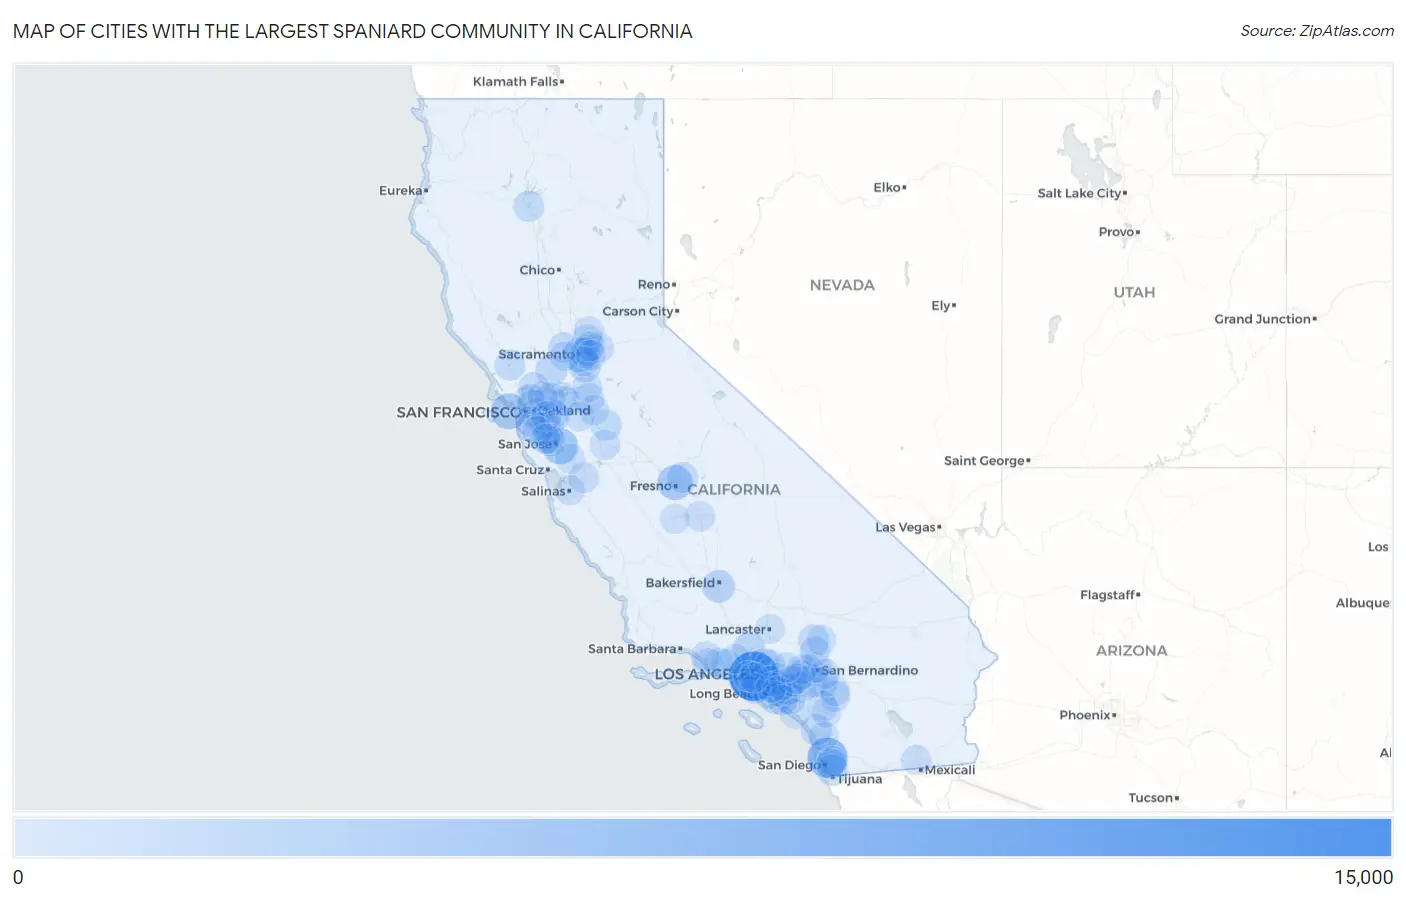 Cities with the Largest Spaniard Community in California Map